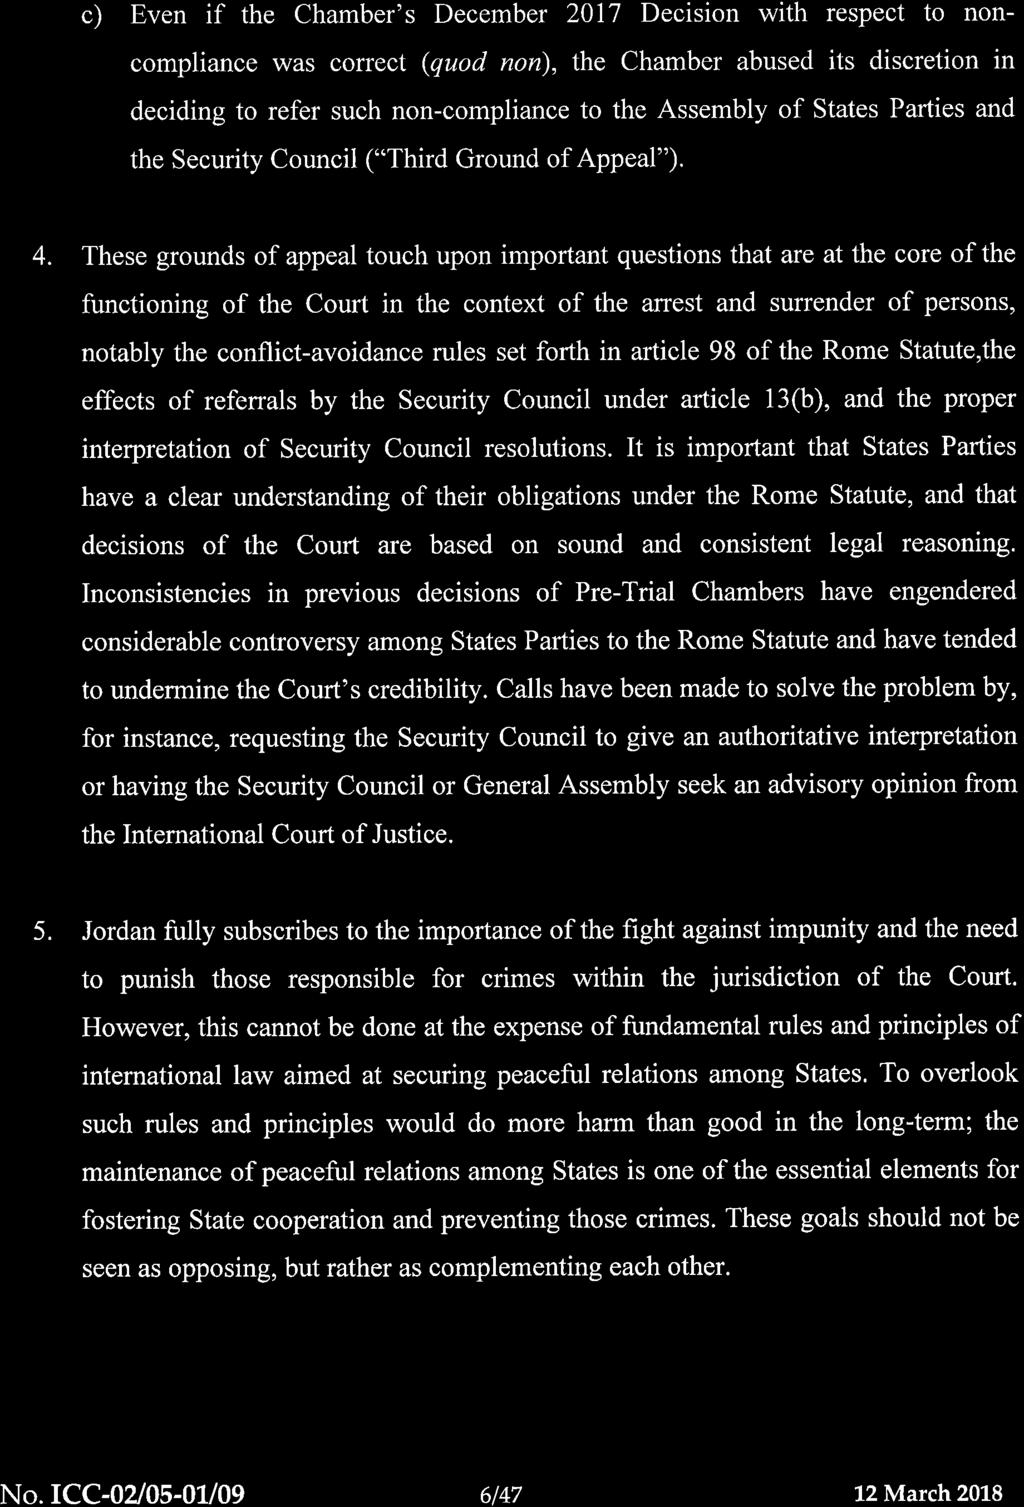 Chamber abused its discretion in deciding to refer such non-compliance to the Assembly of States Parties and the Security Council ("Third Ground of Appeal"). 4.